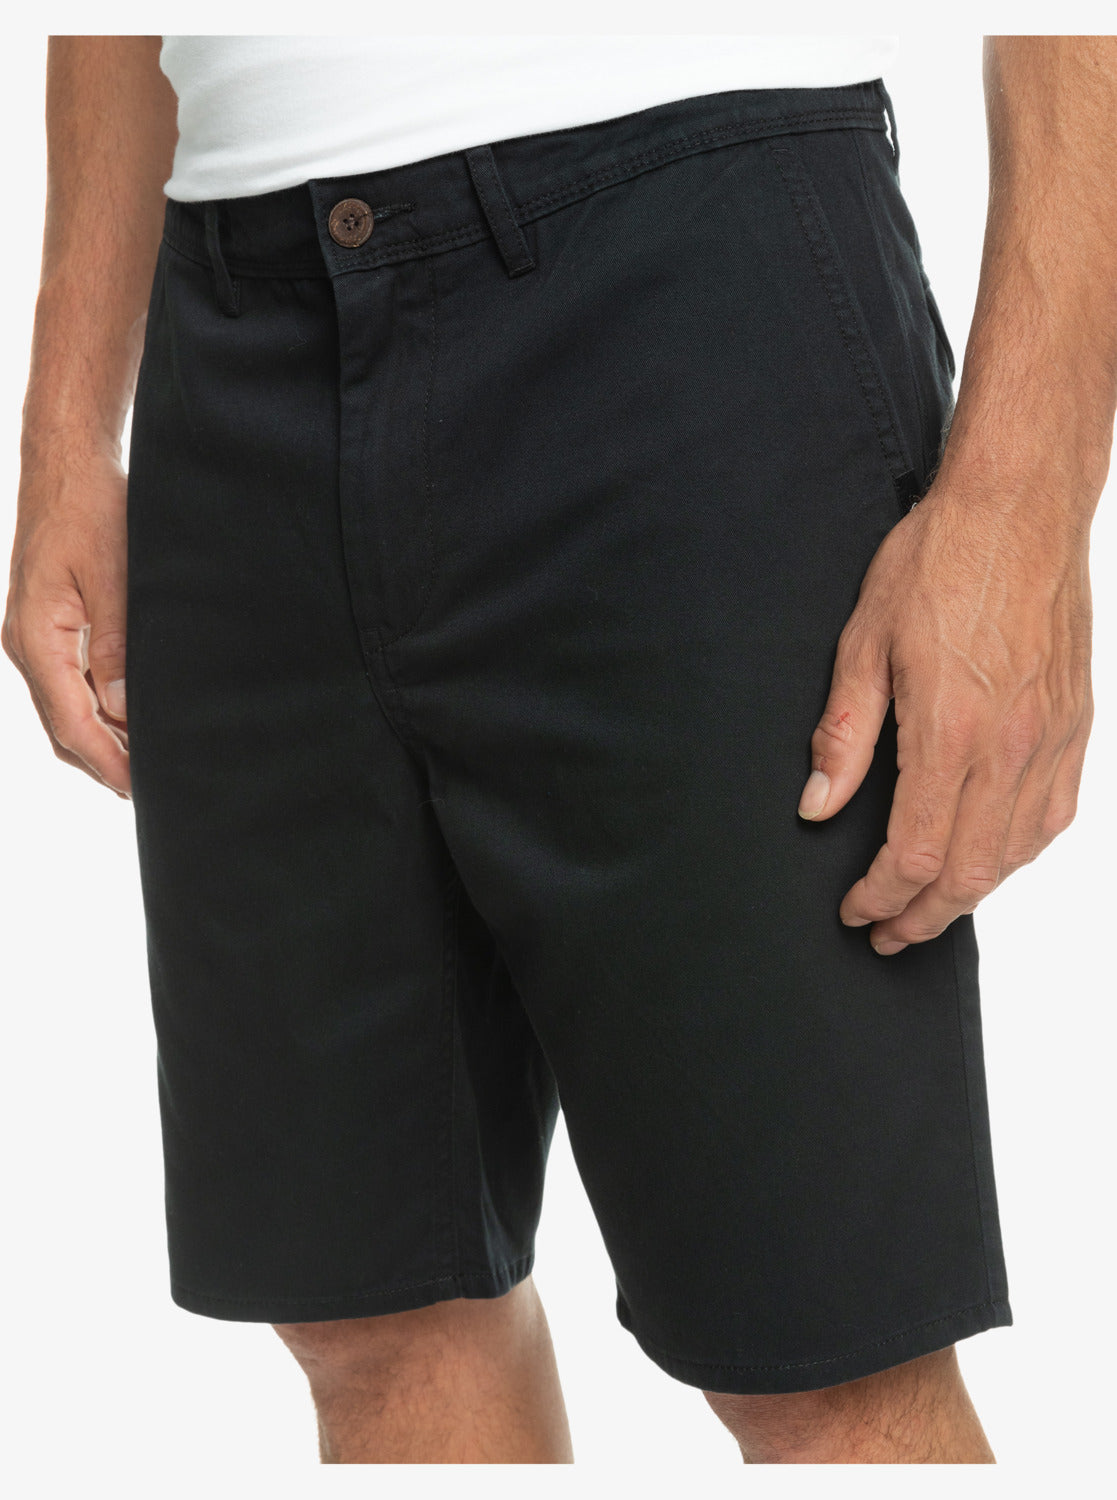 Quiksilver Everyday Chino Light Walkshorts in black from side